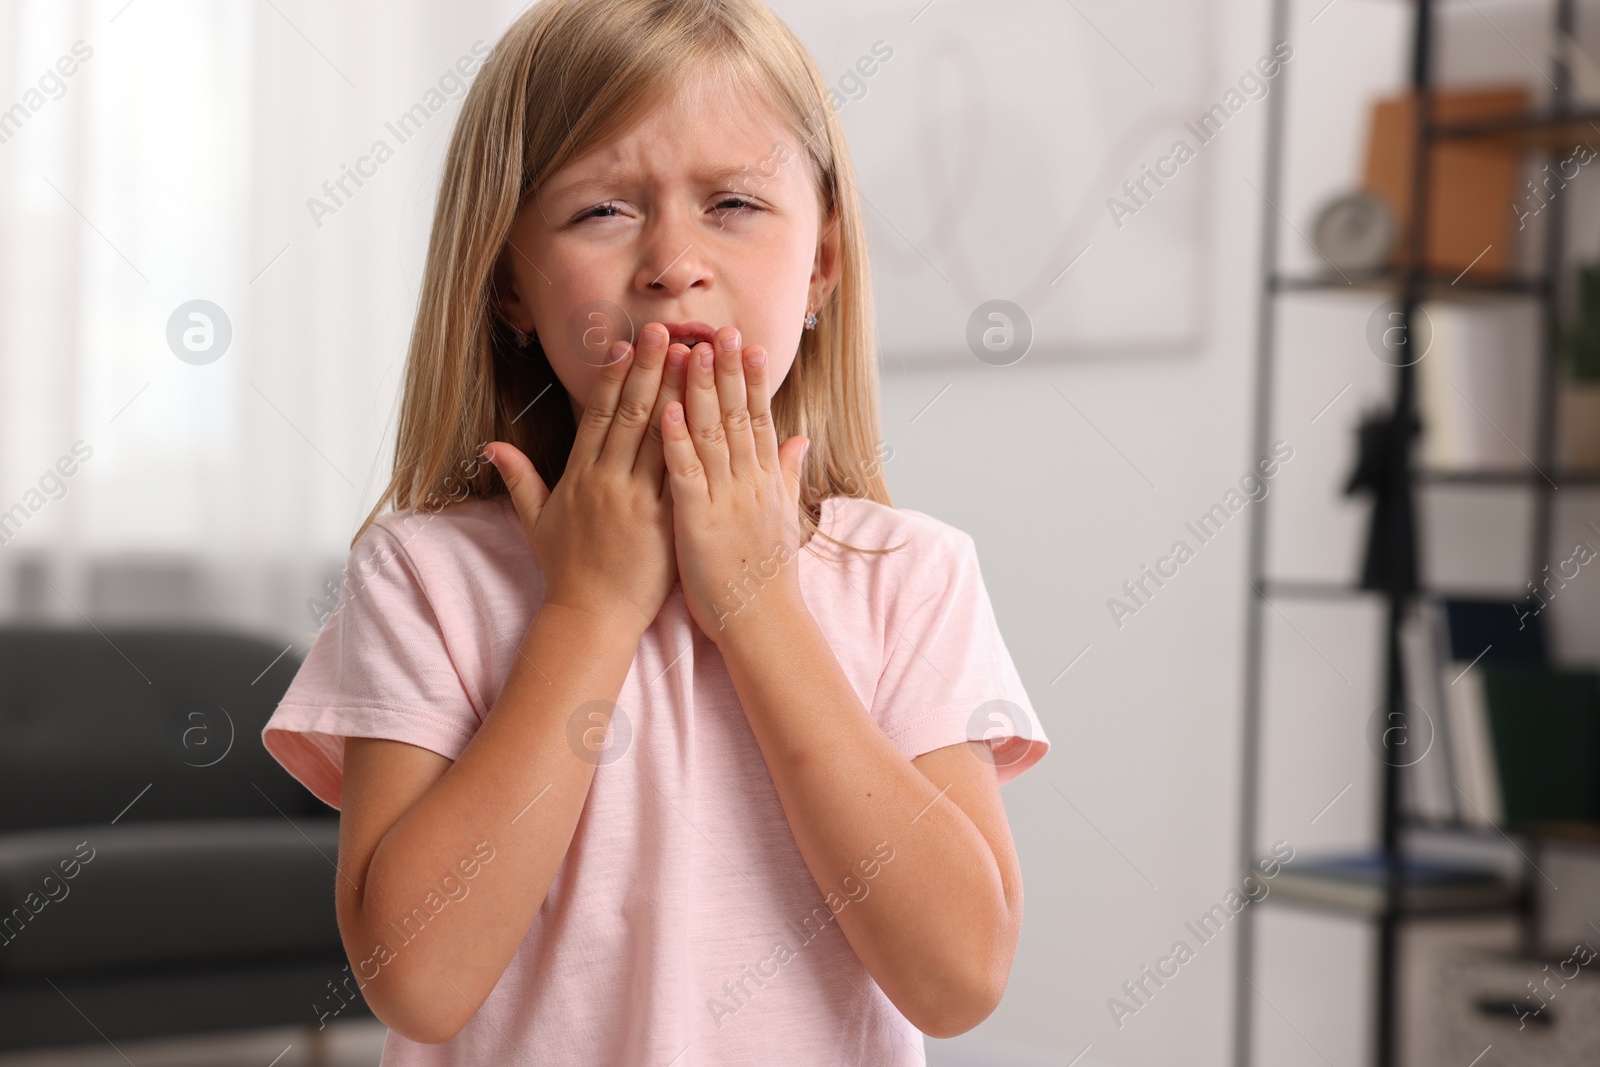 Photo of Suffering from allergy. Little girl sneezing at home